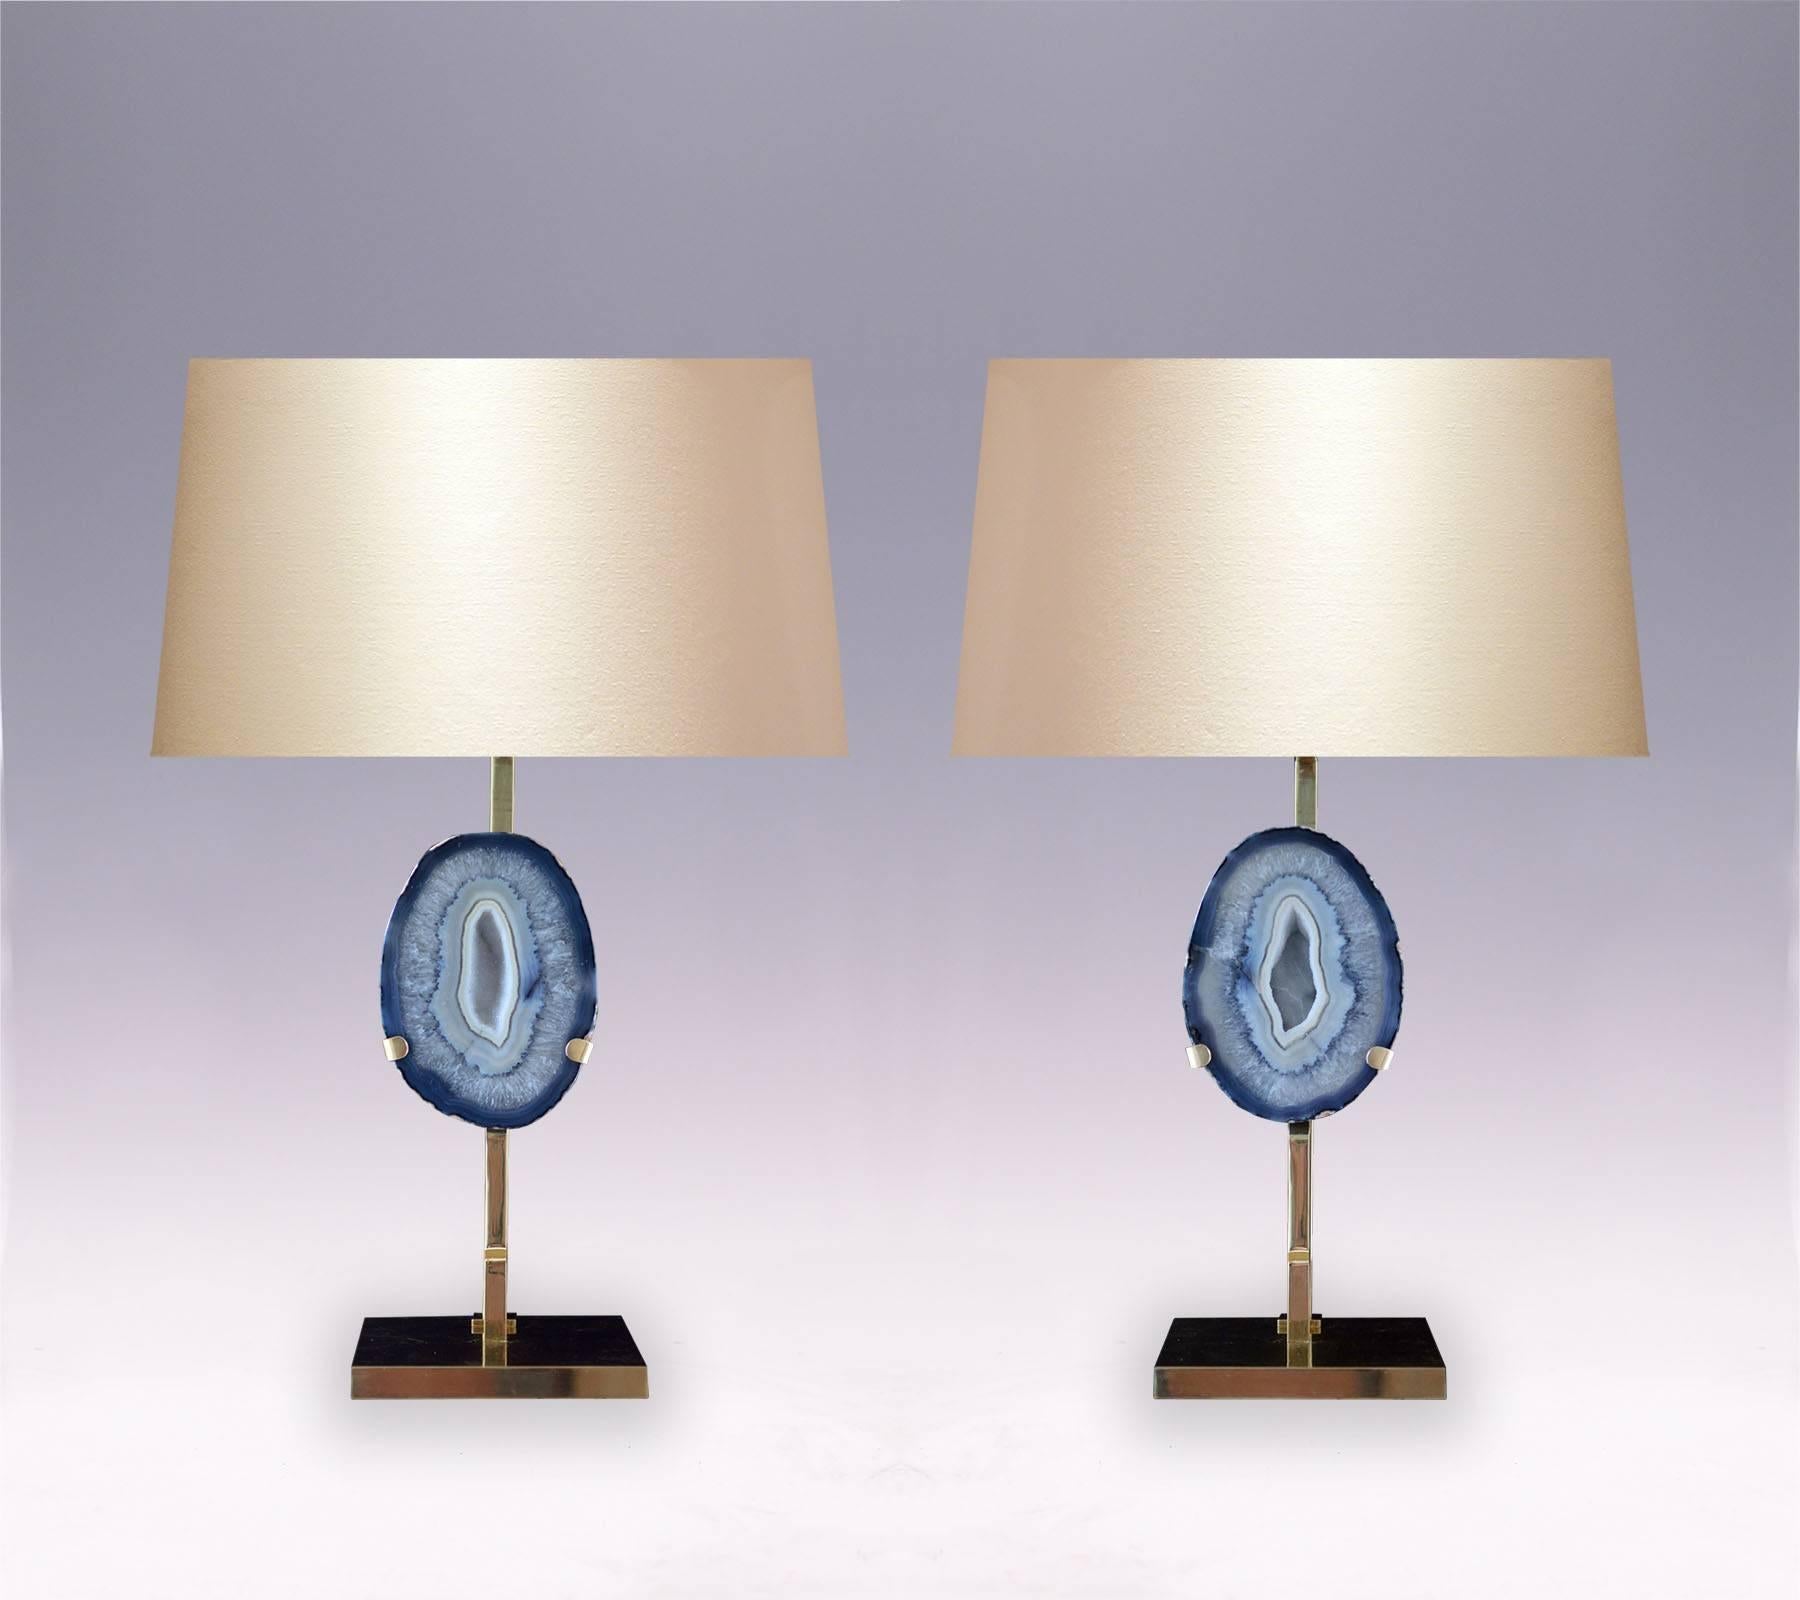 A pair of natural aqua color agate lamps with amazing patterns, with polished brass mount.
(Lampshade not included.)
